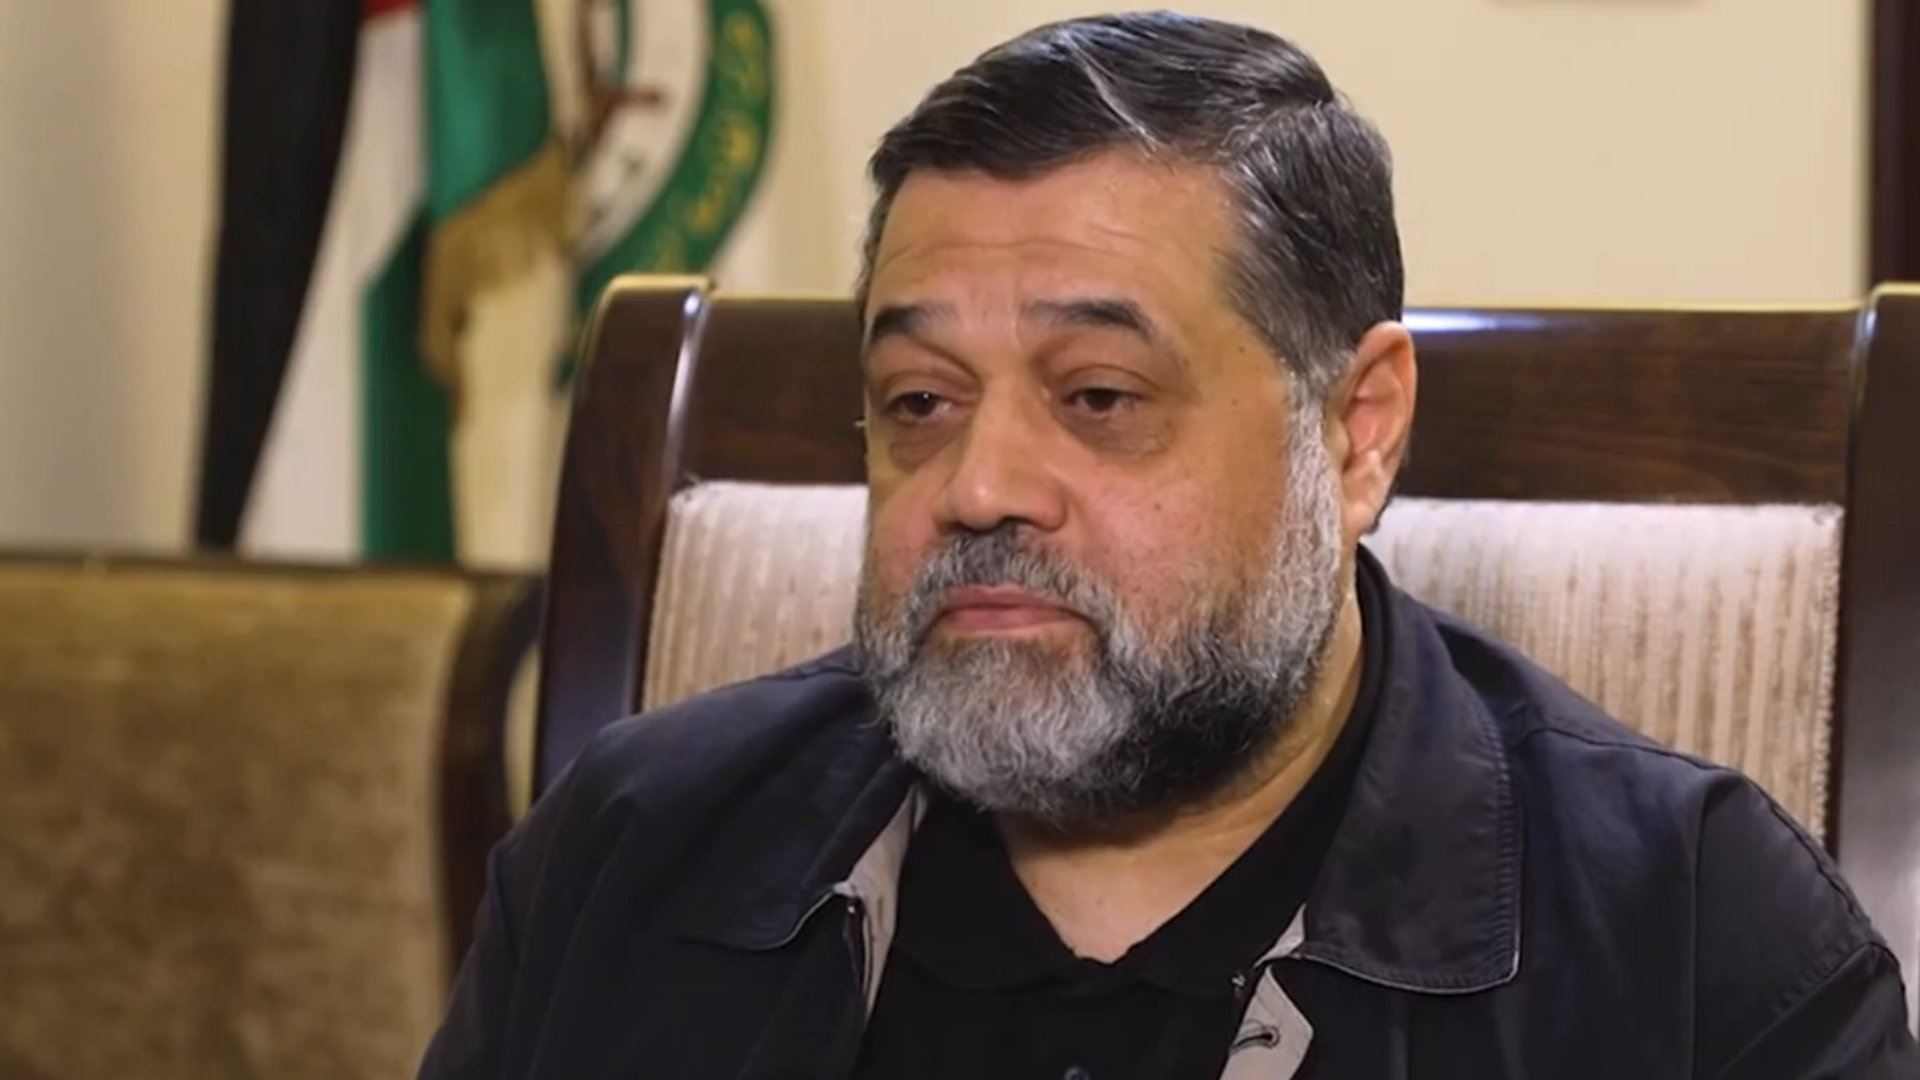 Hamas official says ‘no one has any idea’ if remaining Israeli hostages are alive